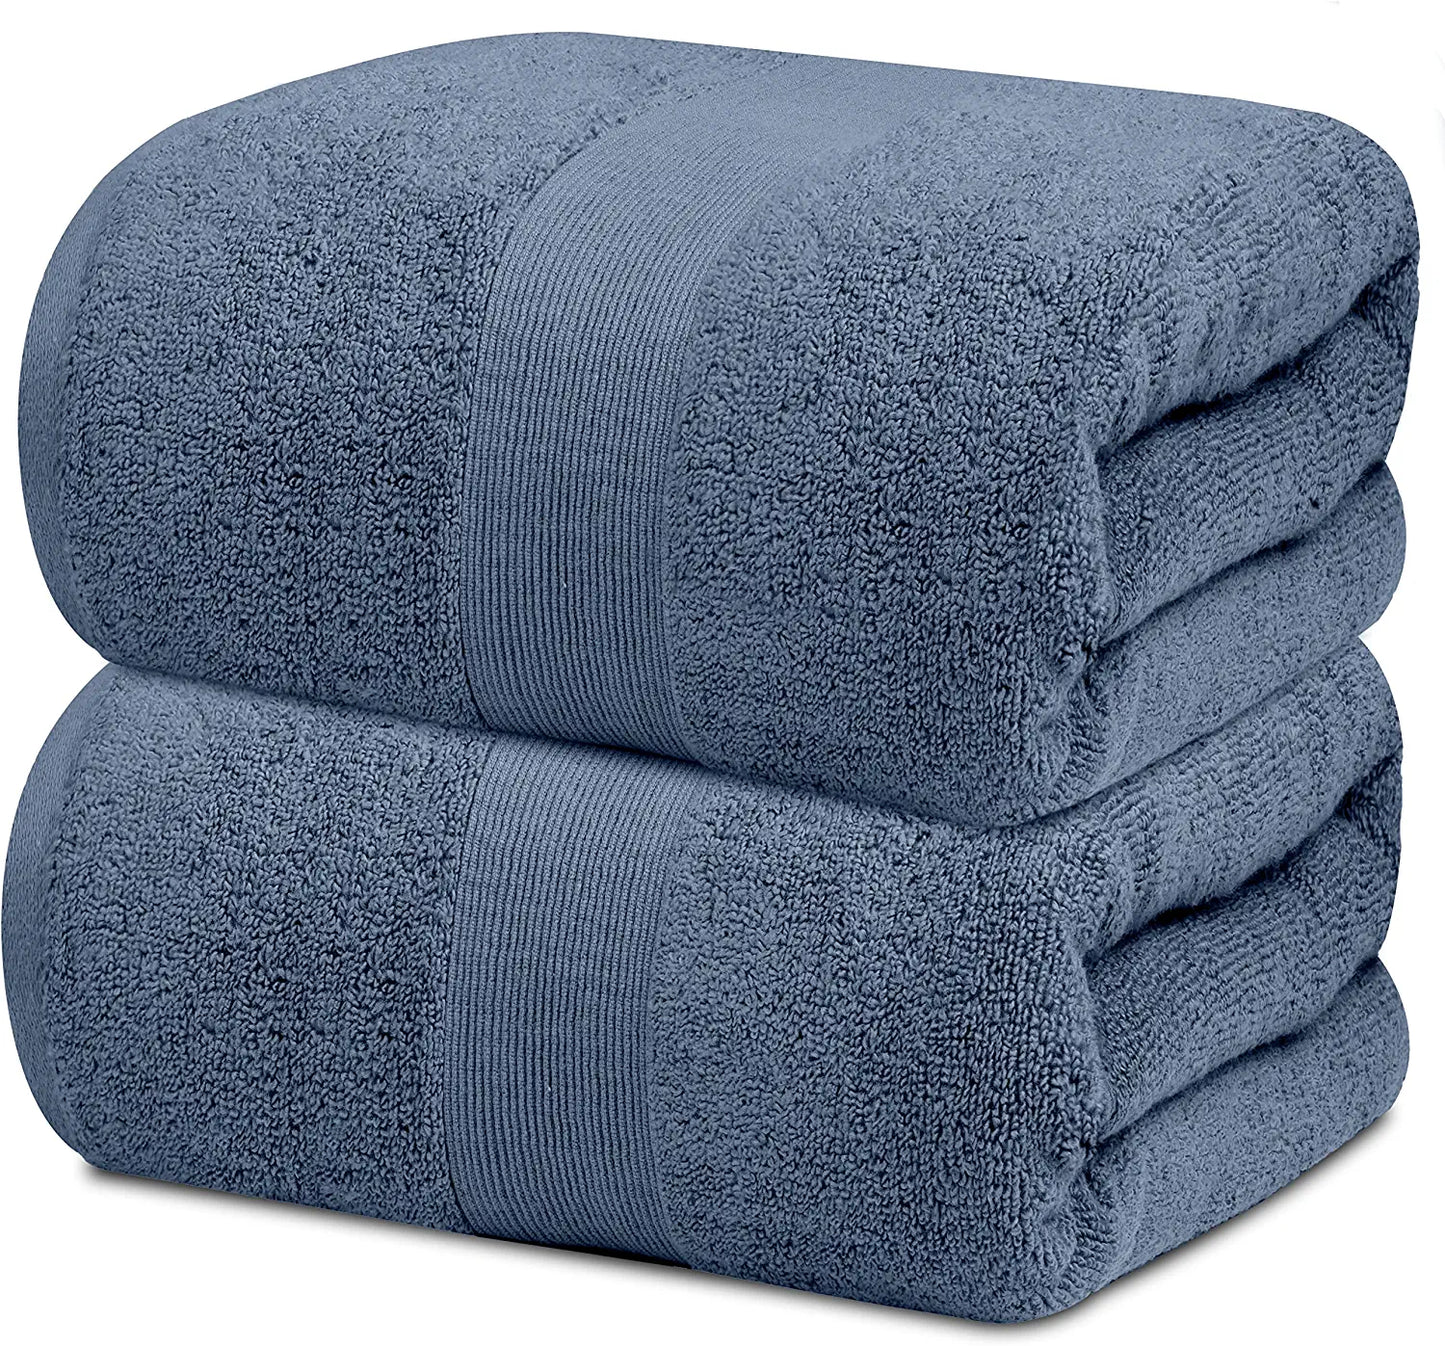 Resort Collection Blue Bath Sheets